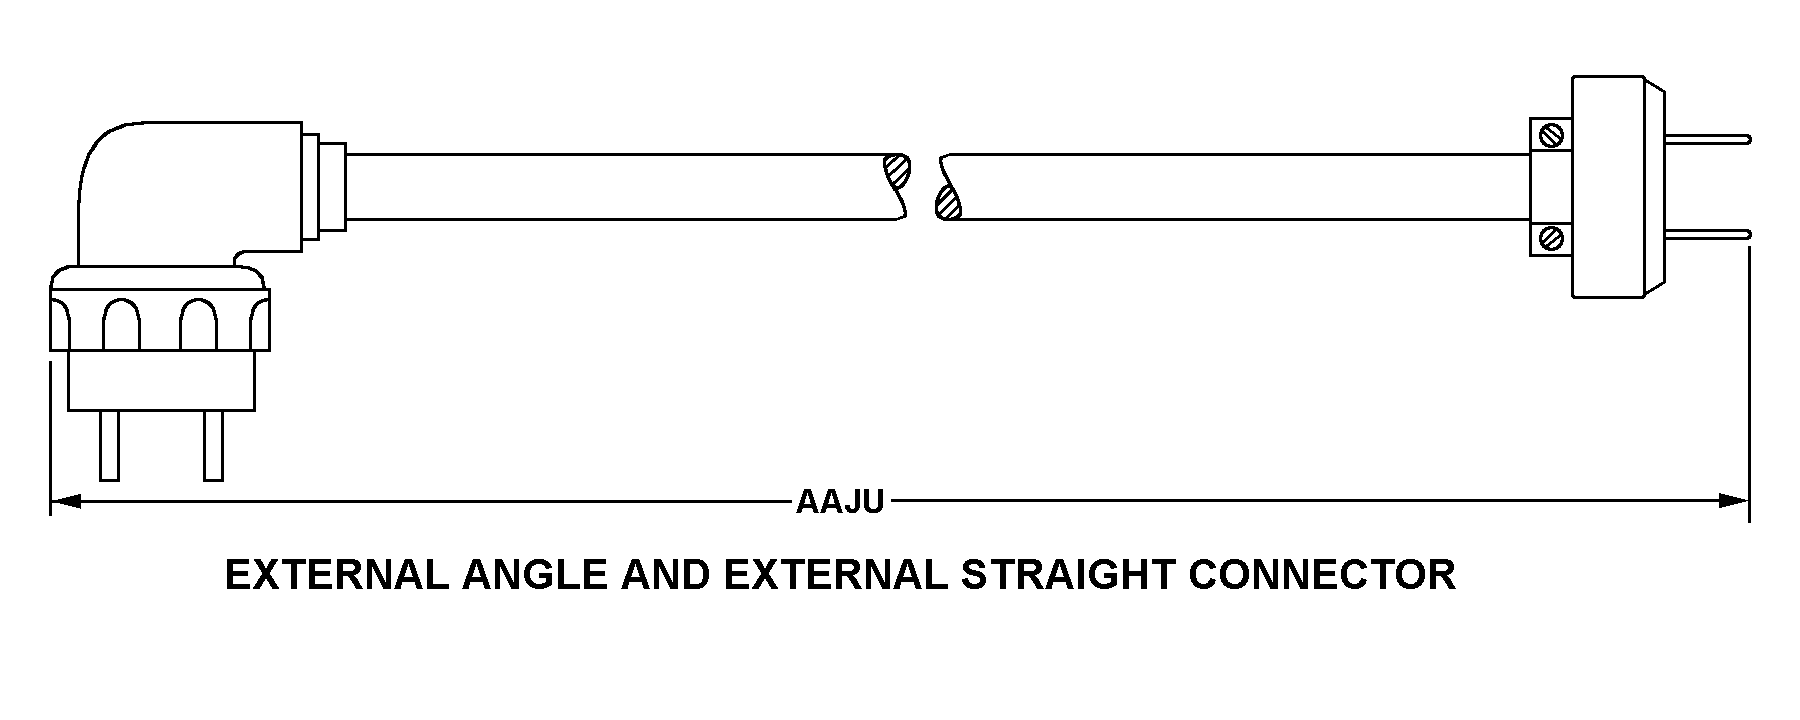 EXTERNAL ANGLE AND EXTERNAL STRAIGHT CONNECTOR style nsn 6150-01-371-0276